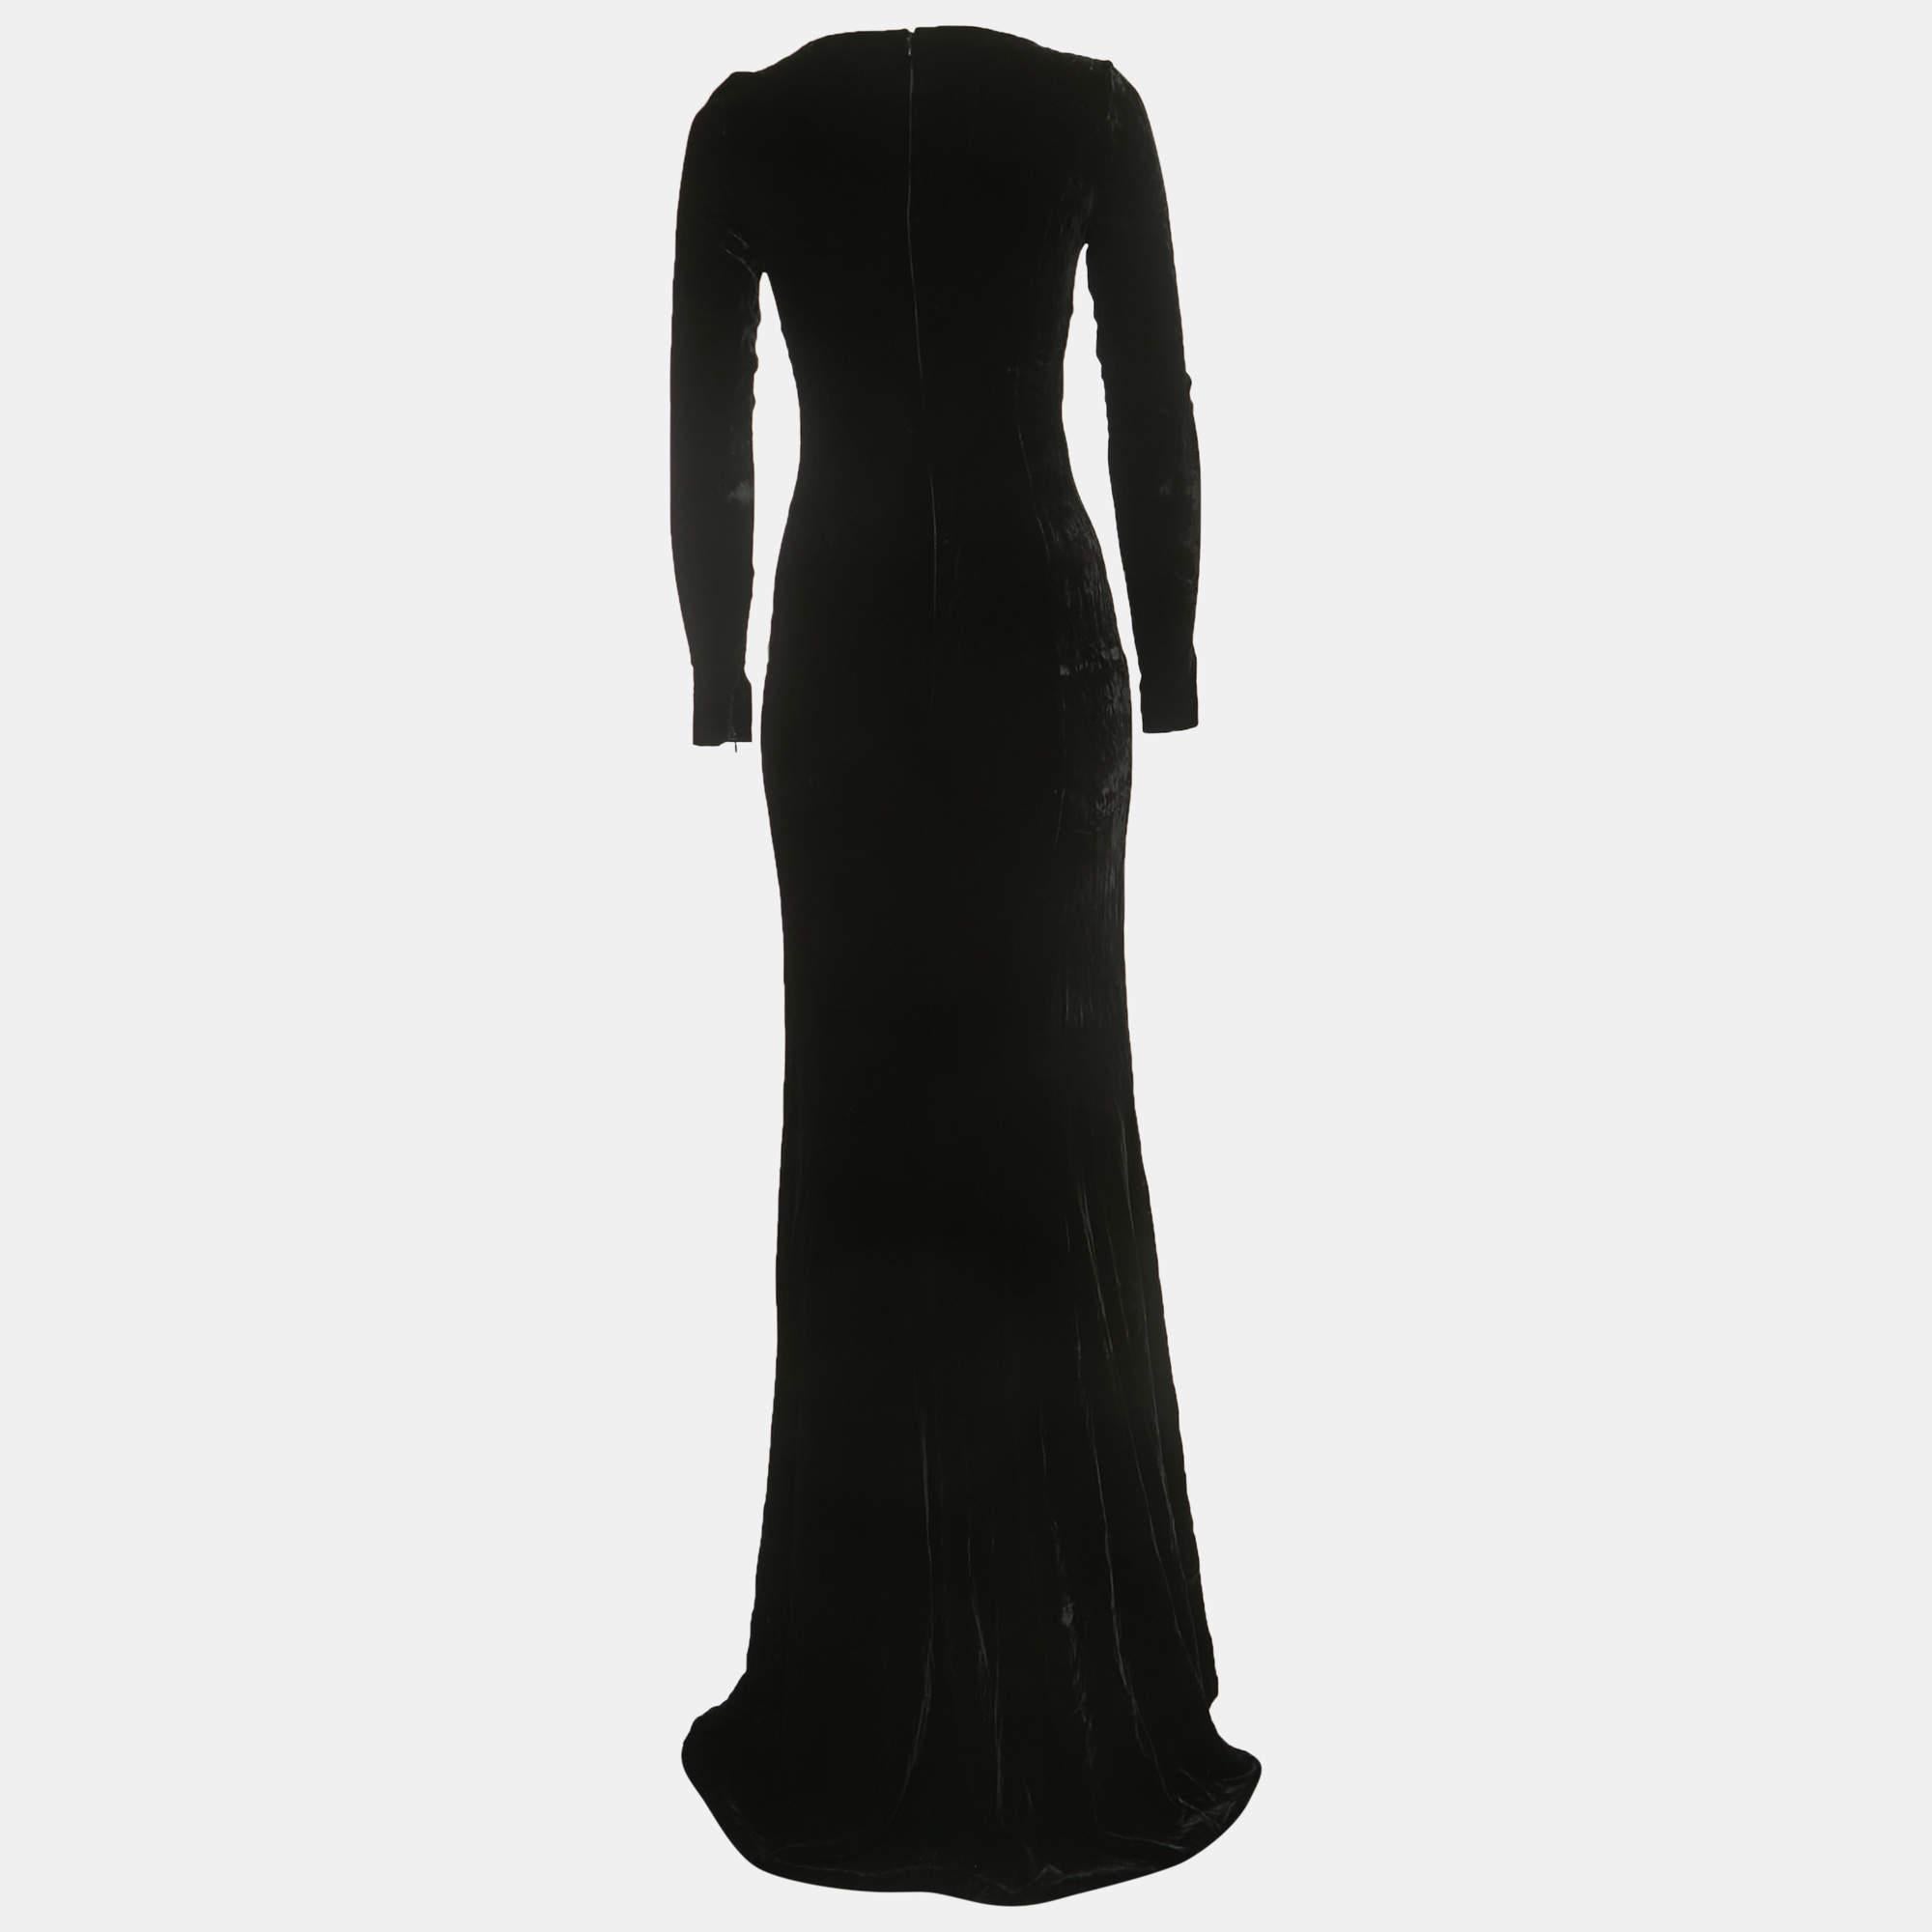 Resplendent, elegant, and gorgeous, this gown defines it all. Flaunting a floor-length silhouette, this gown is beautified using stunning details and a stylish neckline. Wear it with statement accessories and a defining clutch.

